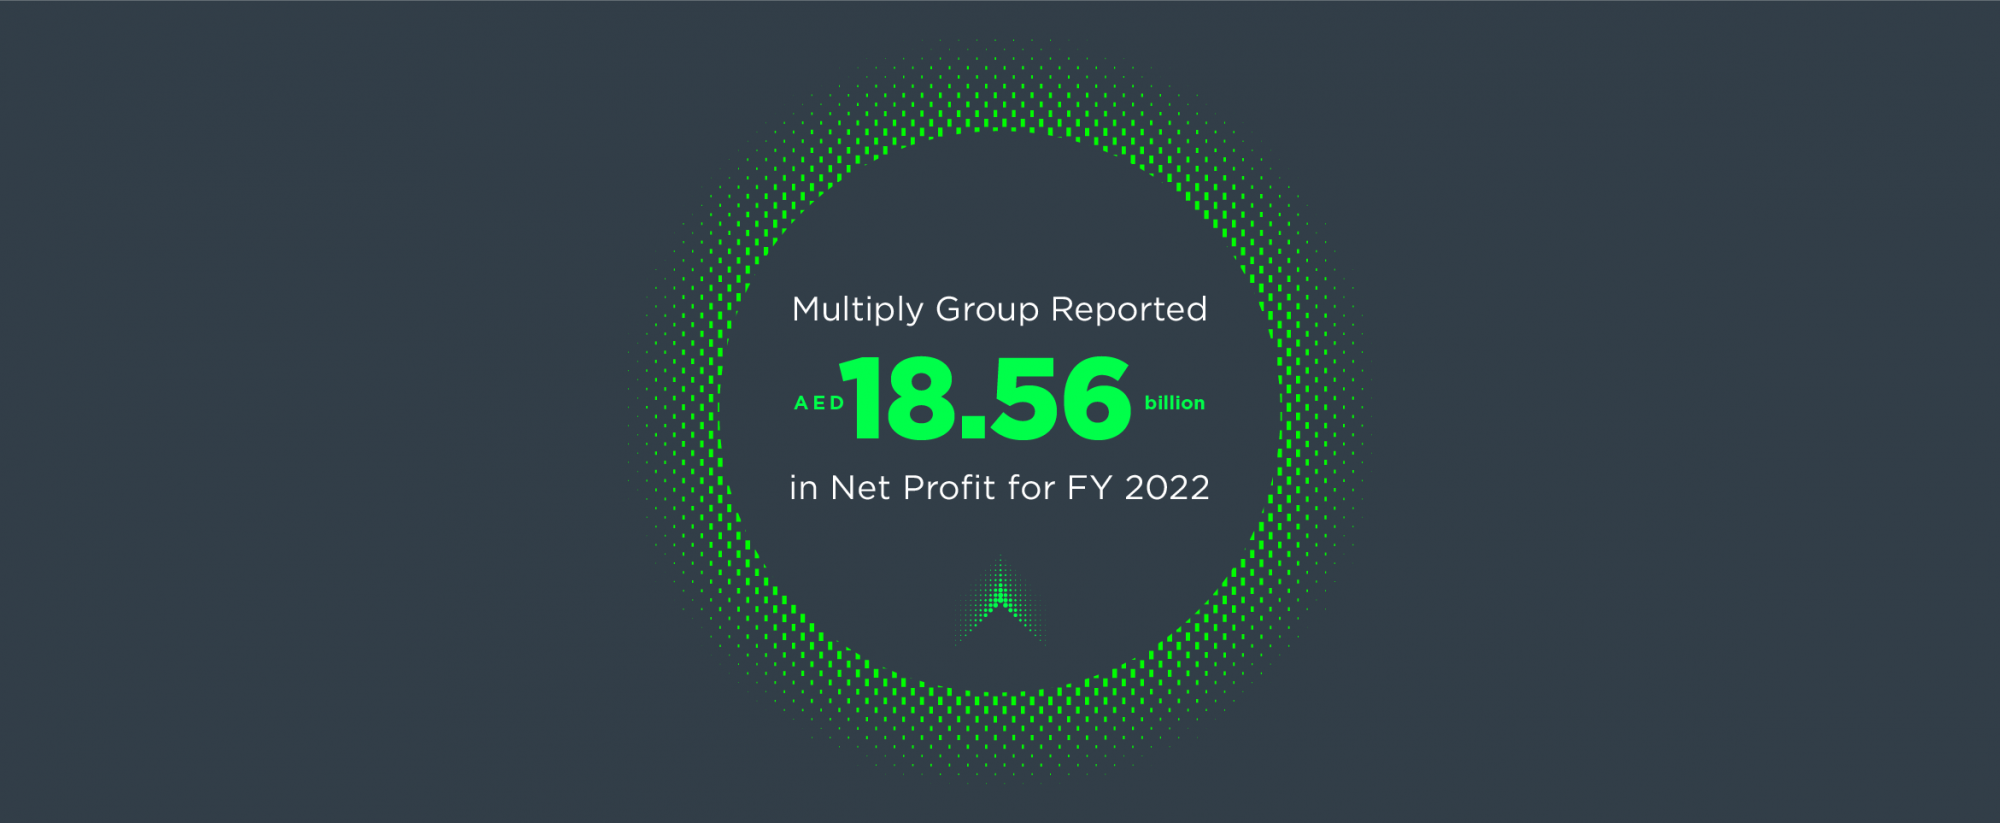 Multiply Group reports net profit of AED 18.56 billion for FY 2022